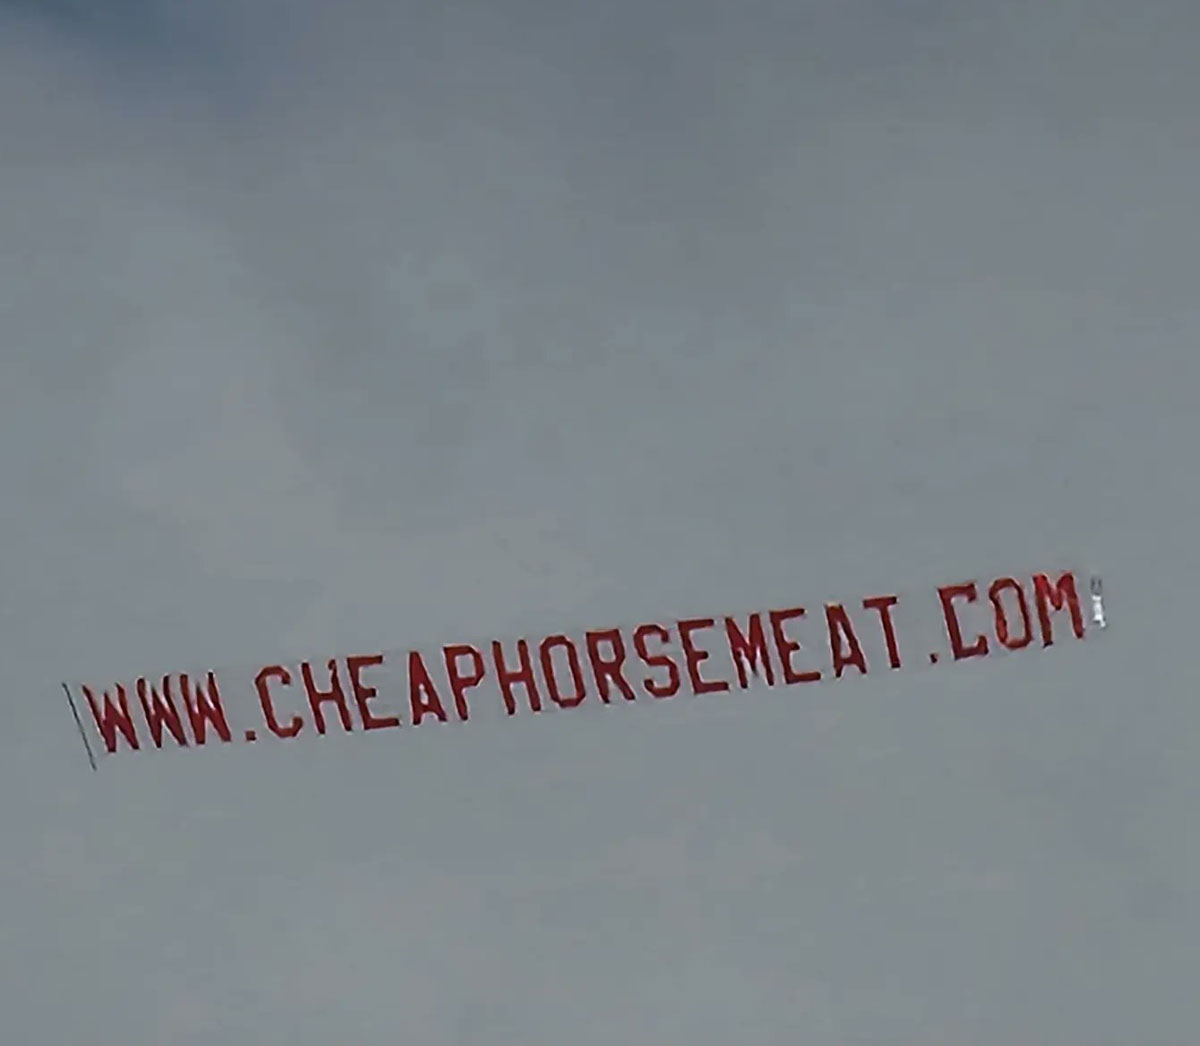 This banner just flew over the Grand National (UK's biggest horse race)